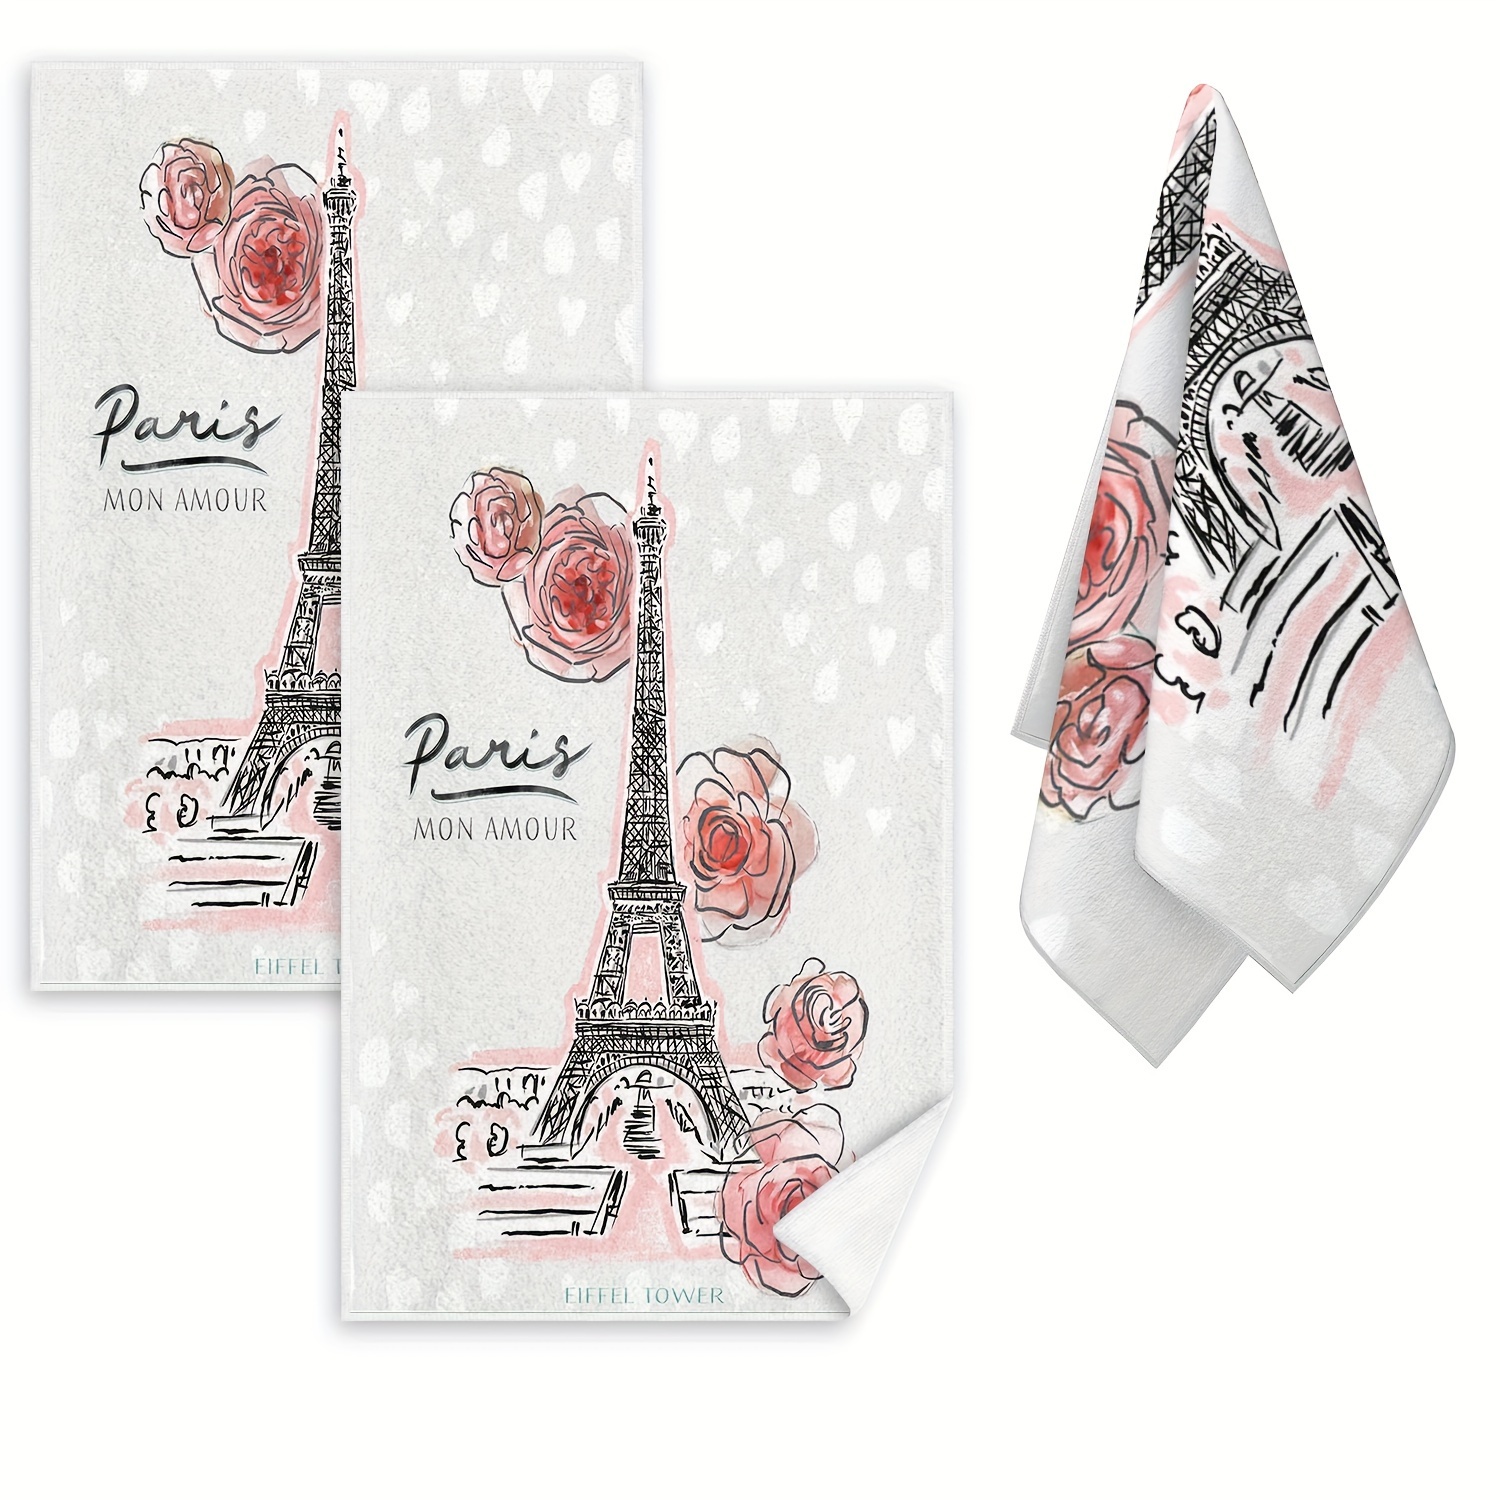 

2pcs, Paris Eiffel Tower Kitchen Towels, Contemporary Style, Ultrafine Microfiber, Fade-resistant, Machine Washable, Dish Towels For Home Decor & Daily Use